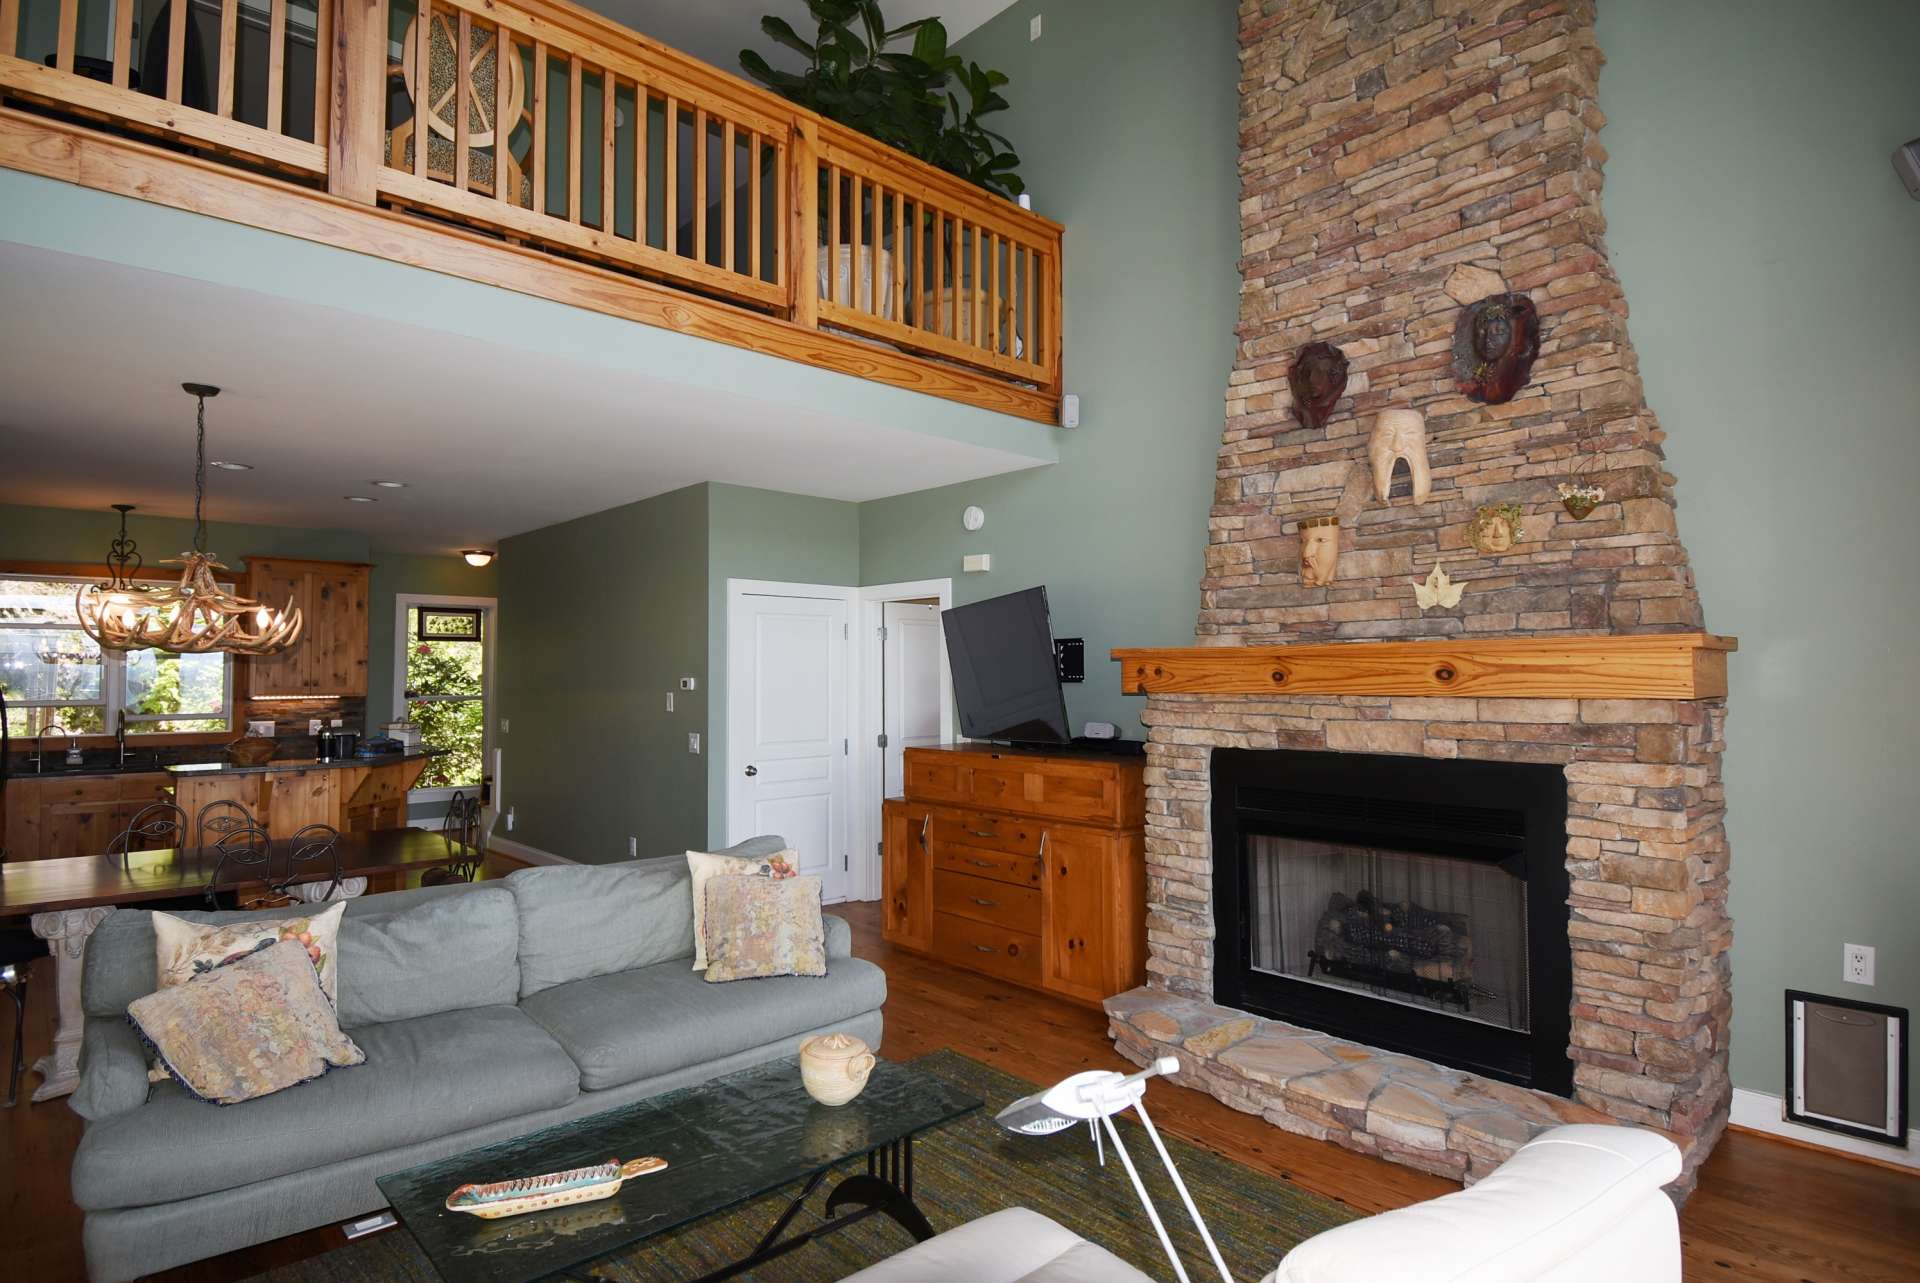 The living area features a floor to ceiling gas log fireplace, wood floor and lots of windows to savor the mountain scenery while relaxing in front of the fireplace.